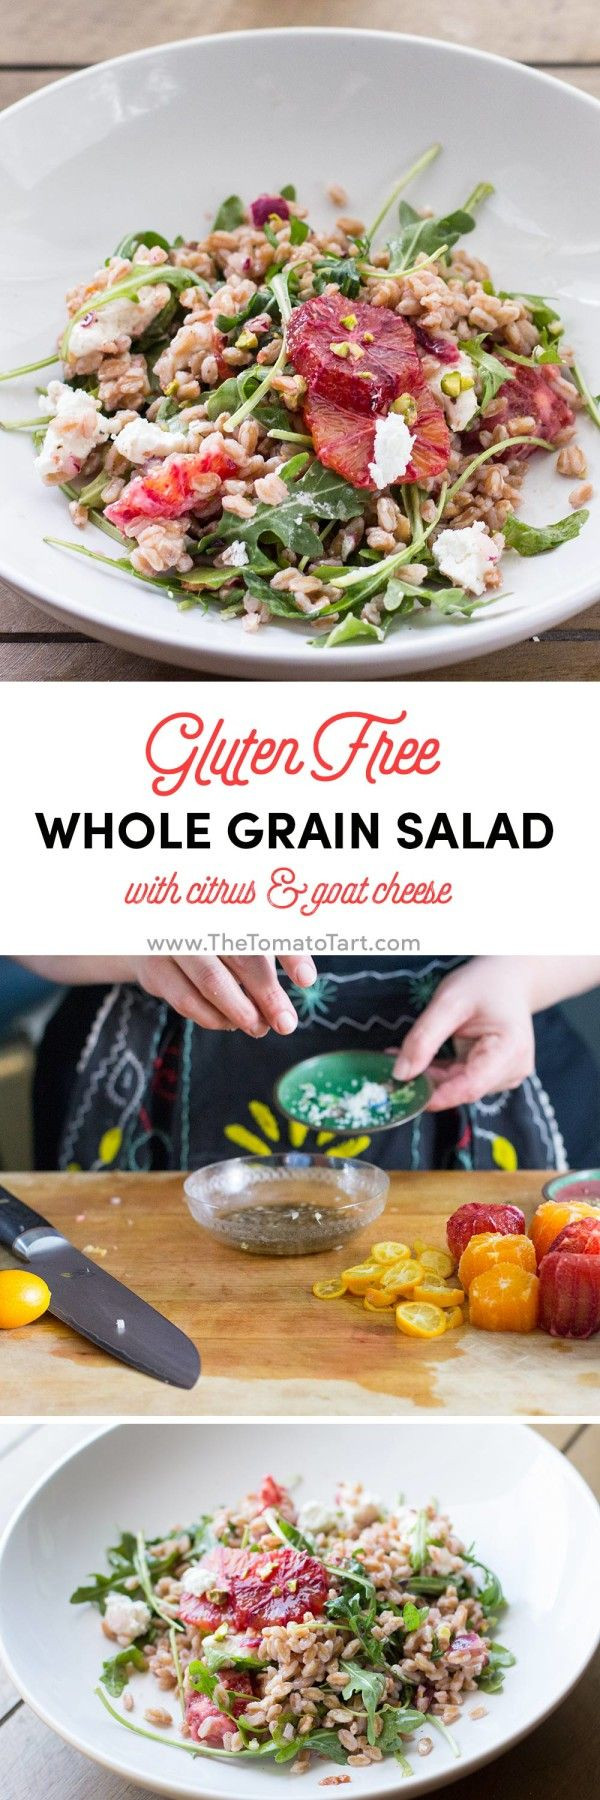 Gluten Free Gourmet Recipes
 Gluten Free Whole Grain Salad with Citrus from